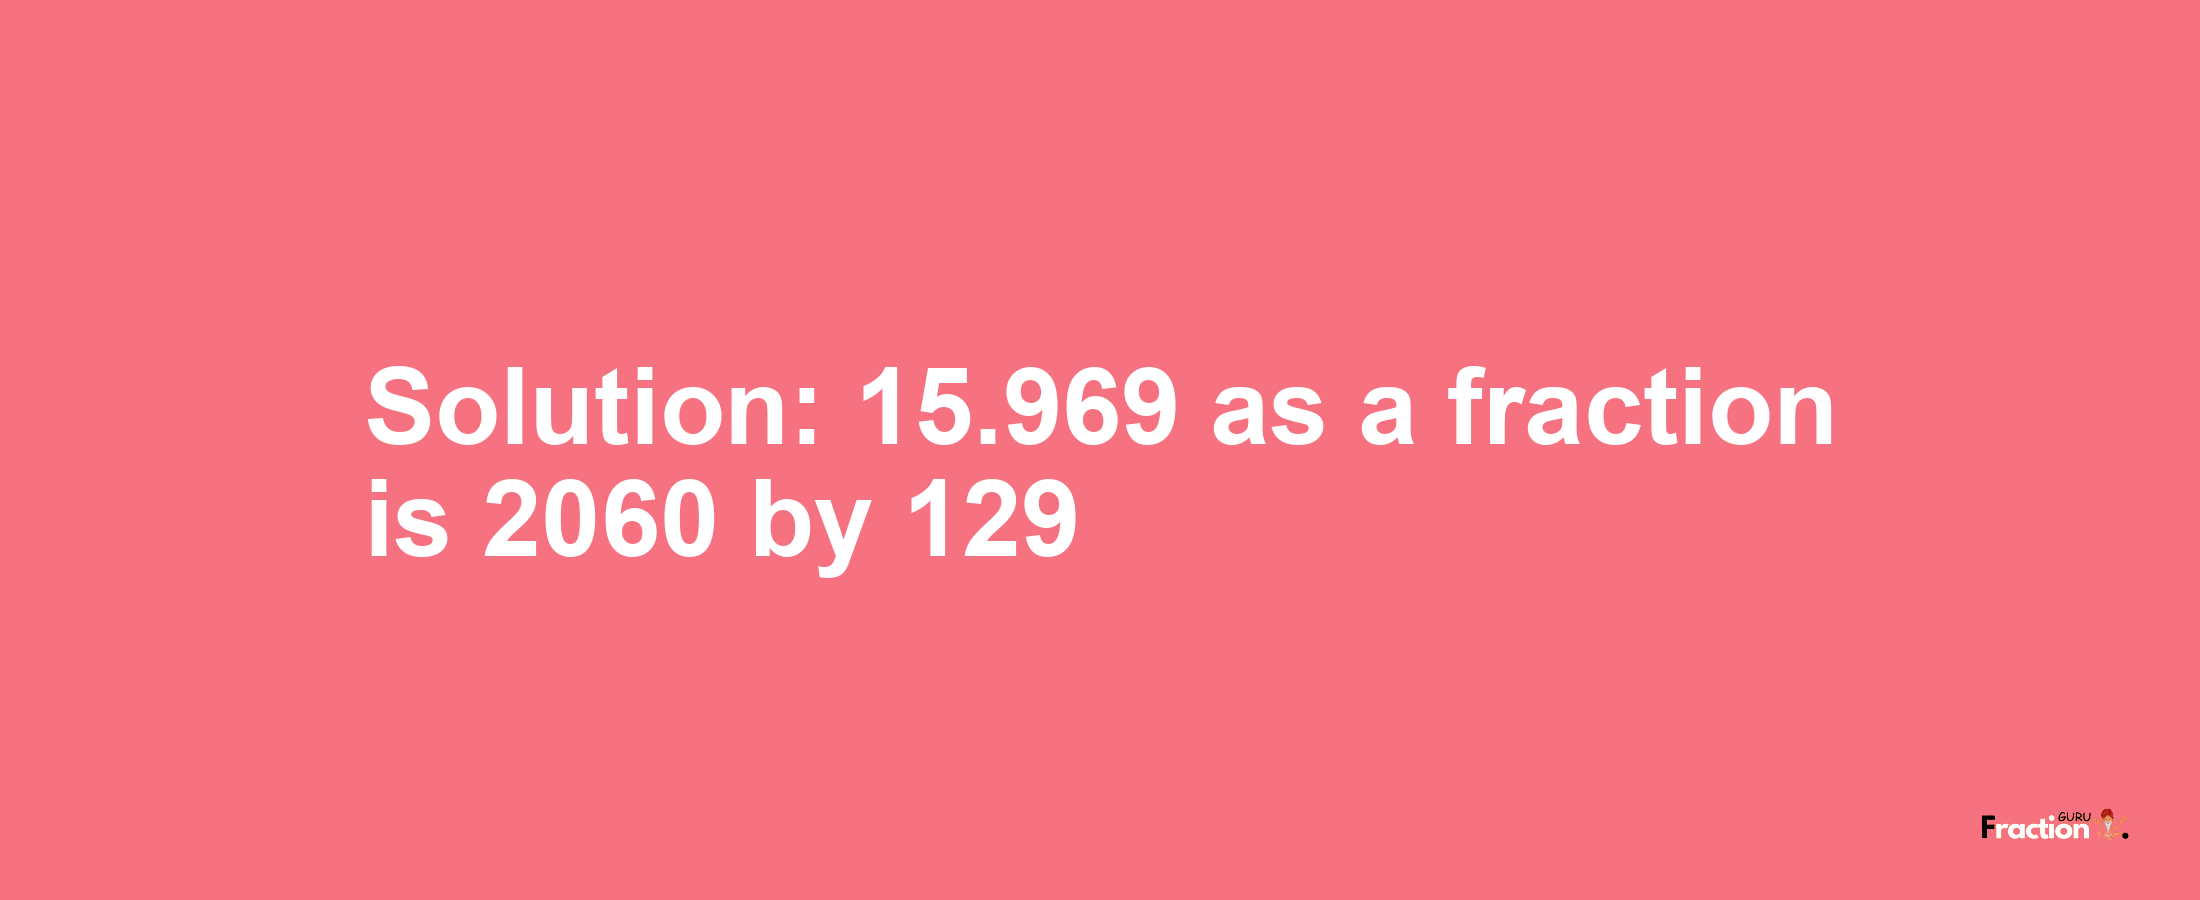 Solution:15.969 as a fraction is 2060/129